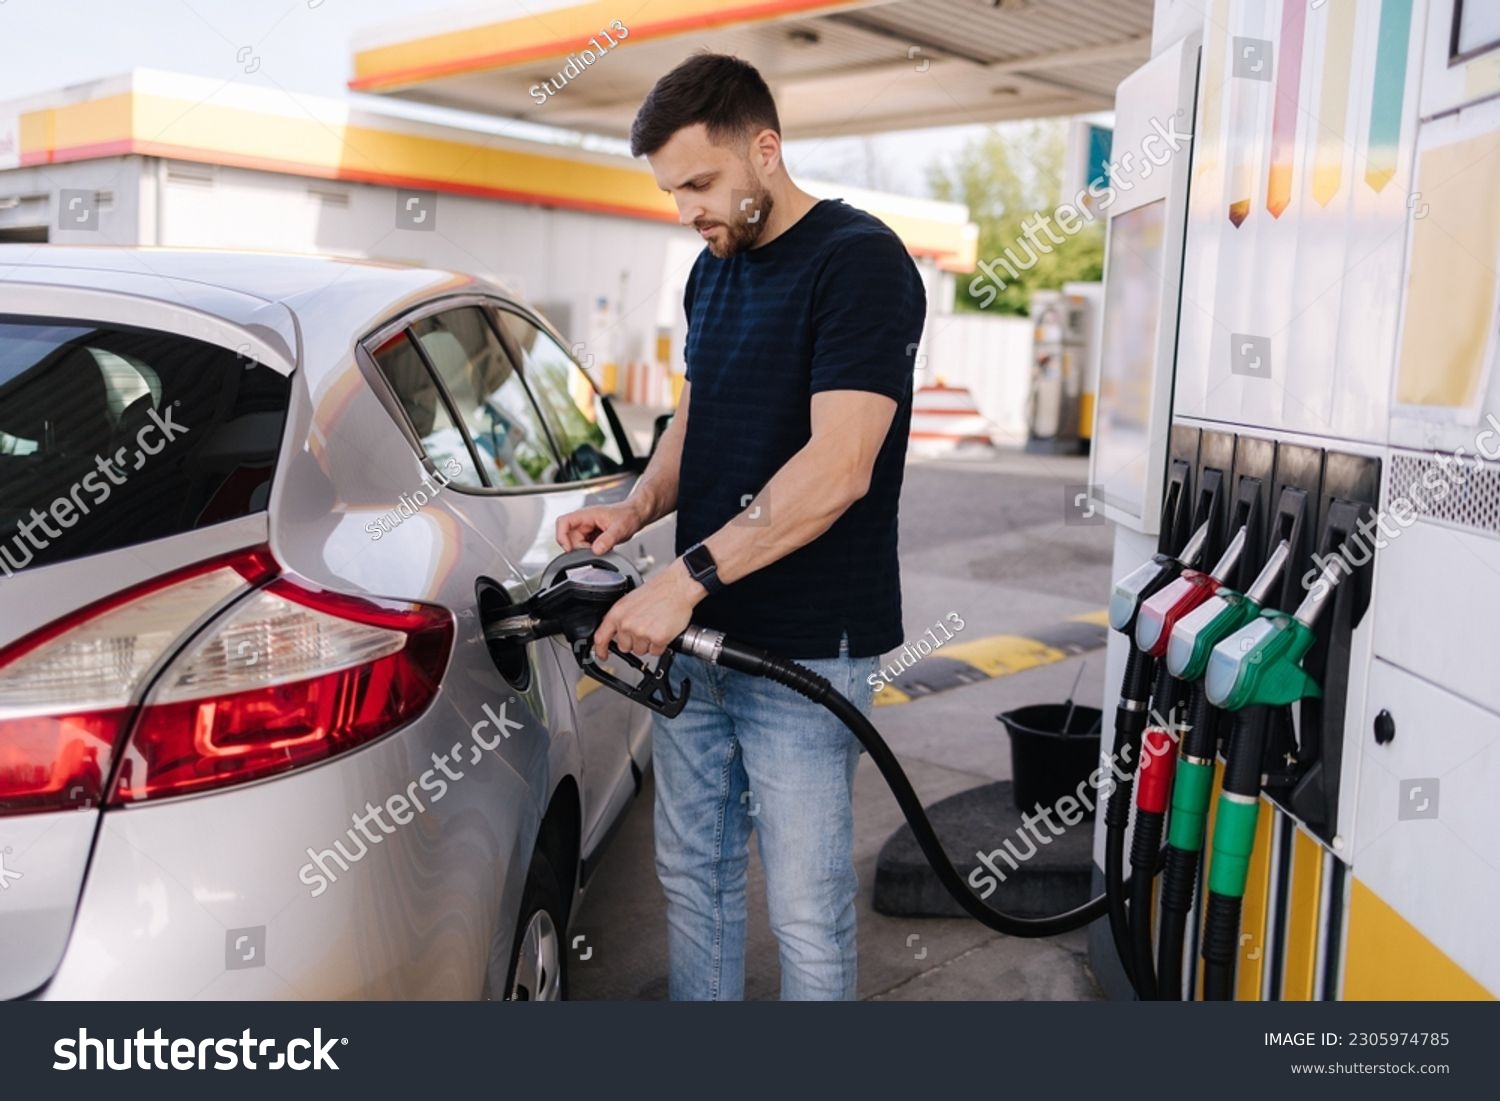 Handsome young man refueling car at gas station. Male filling diesel at gasoline fuel in car using a fuel nozzle. Petrol concept. Side view #2305974785